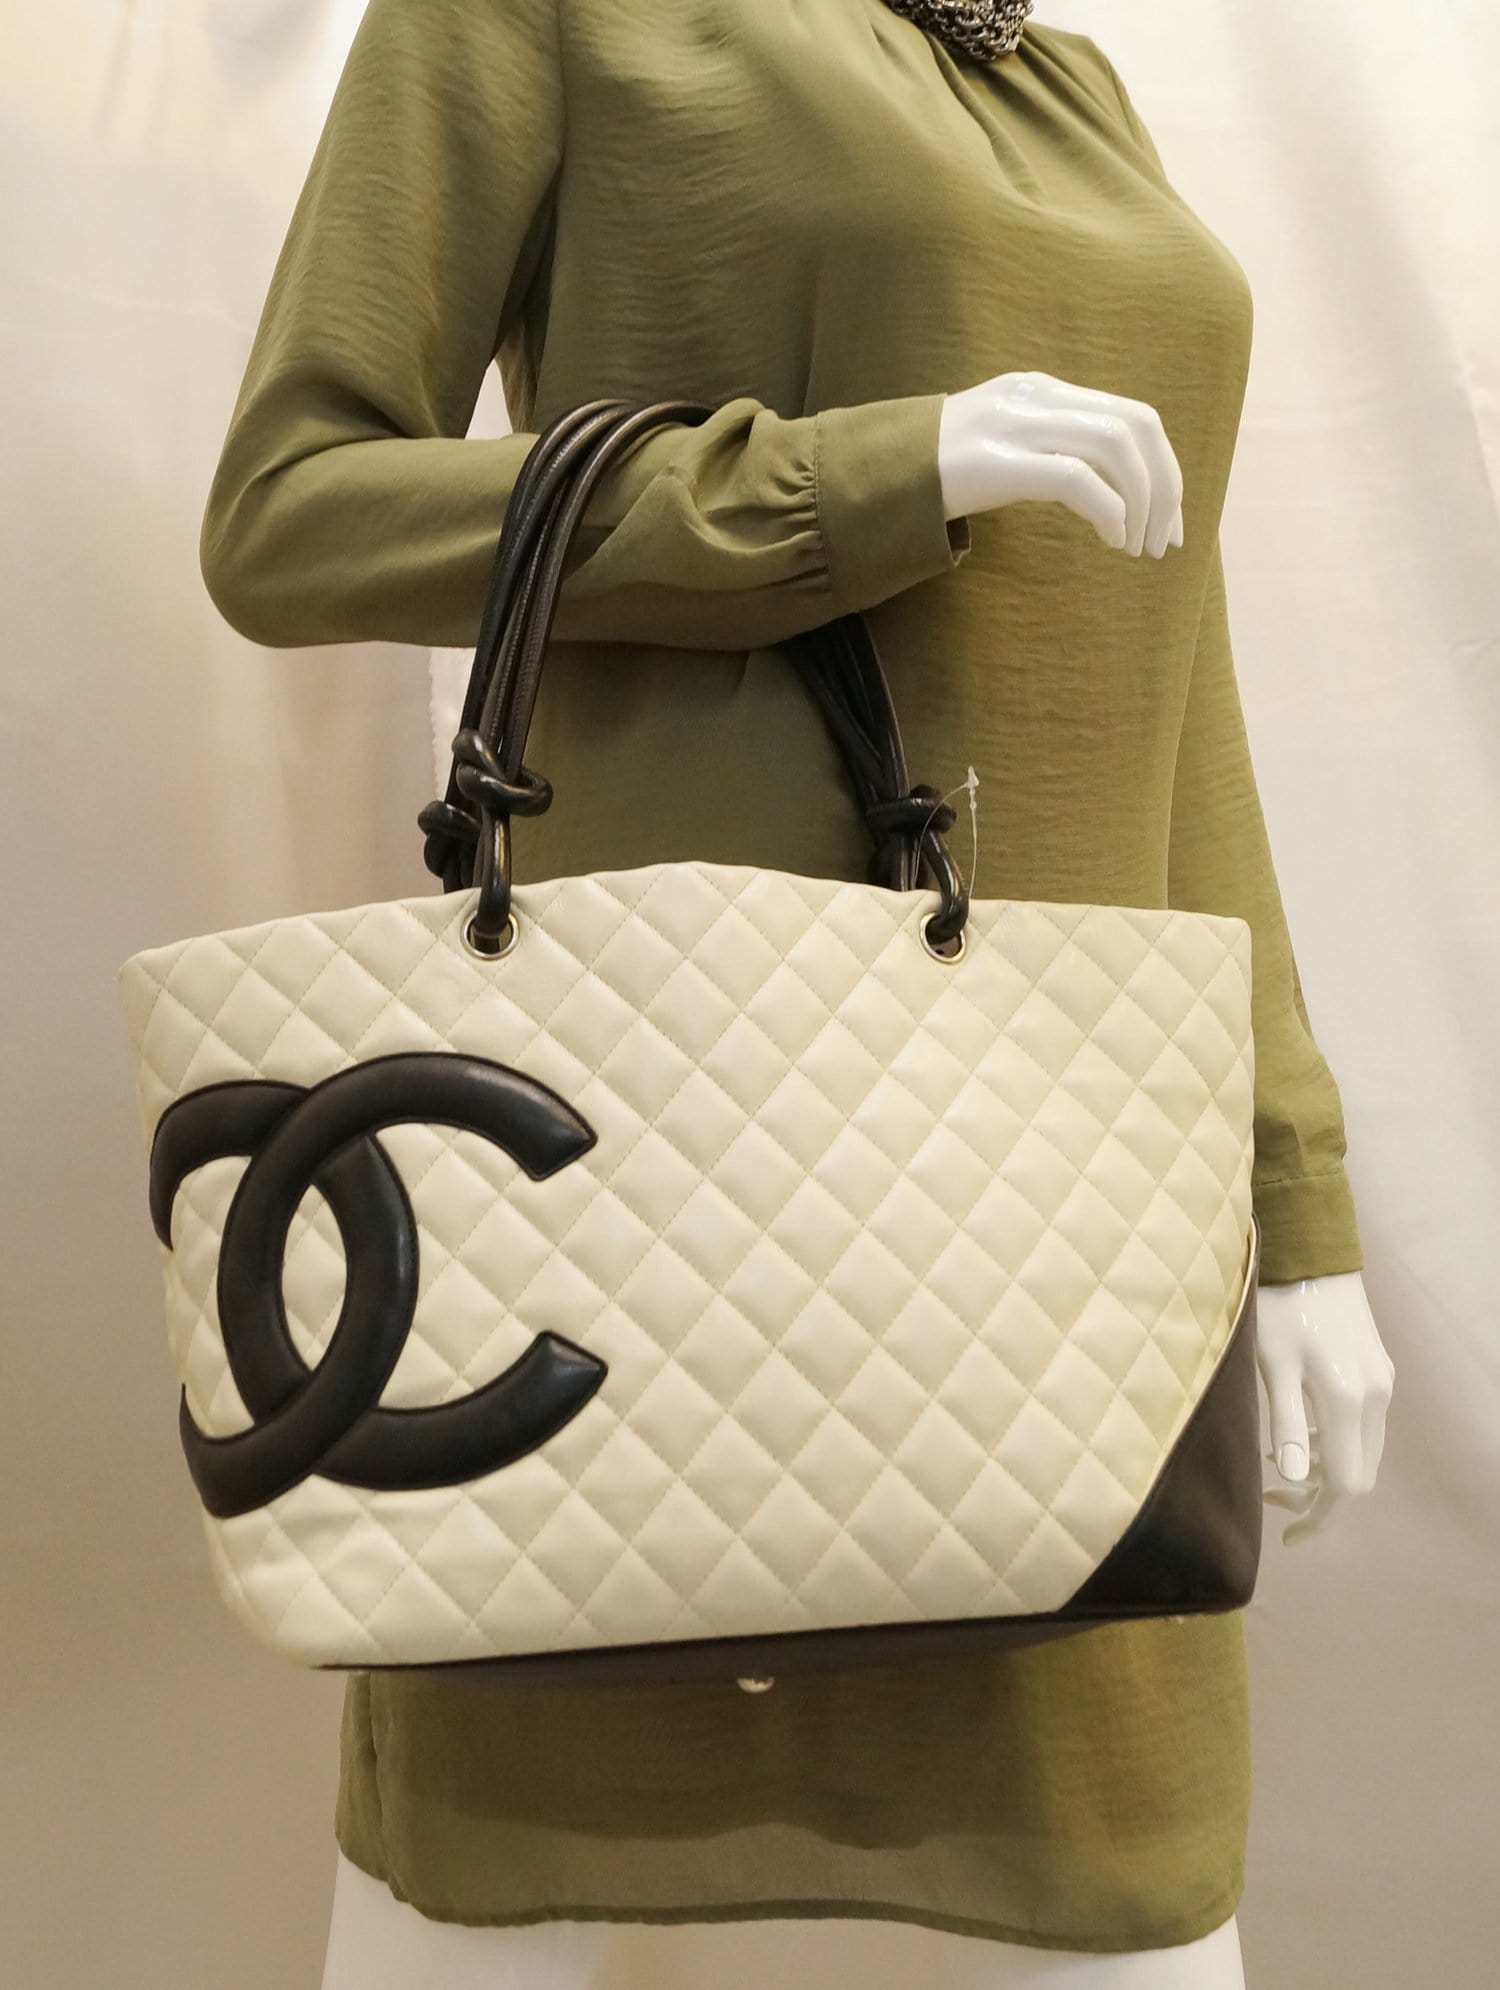 White Quilted Chanel Handbag Paul Smith